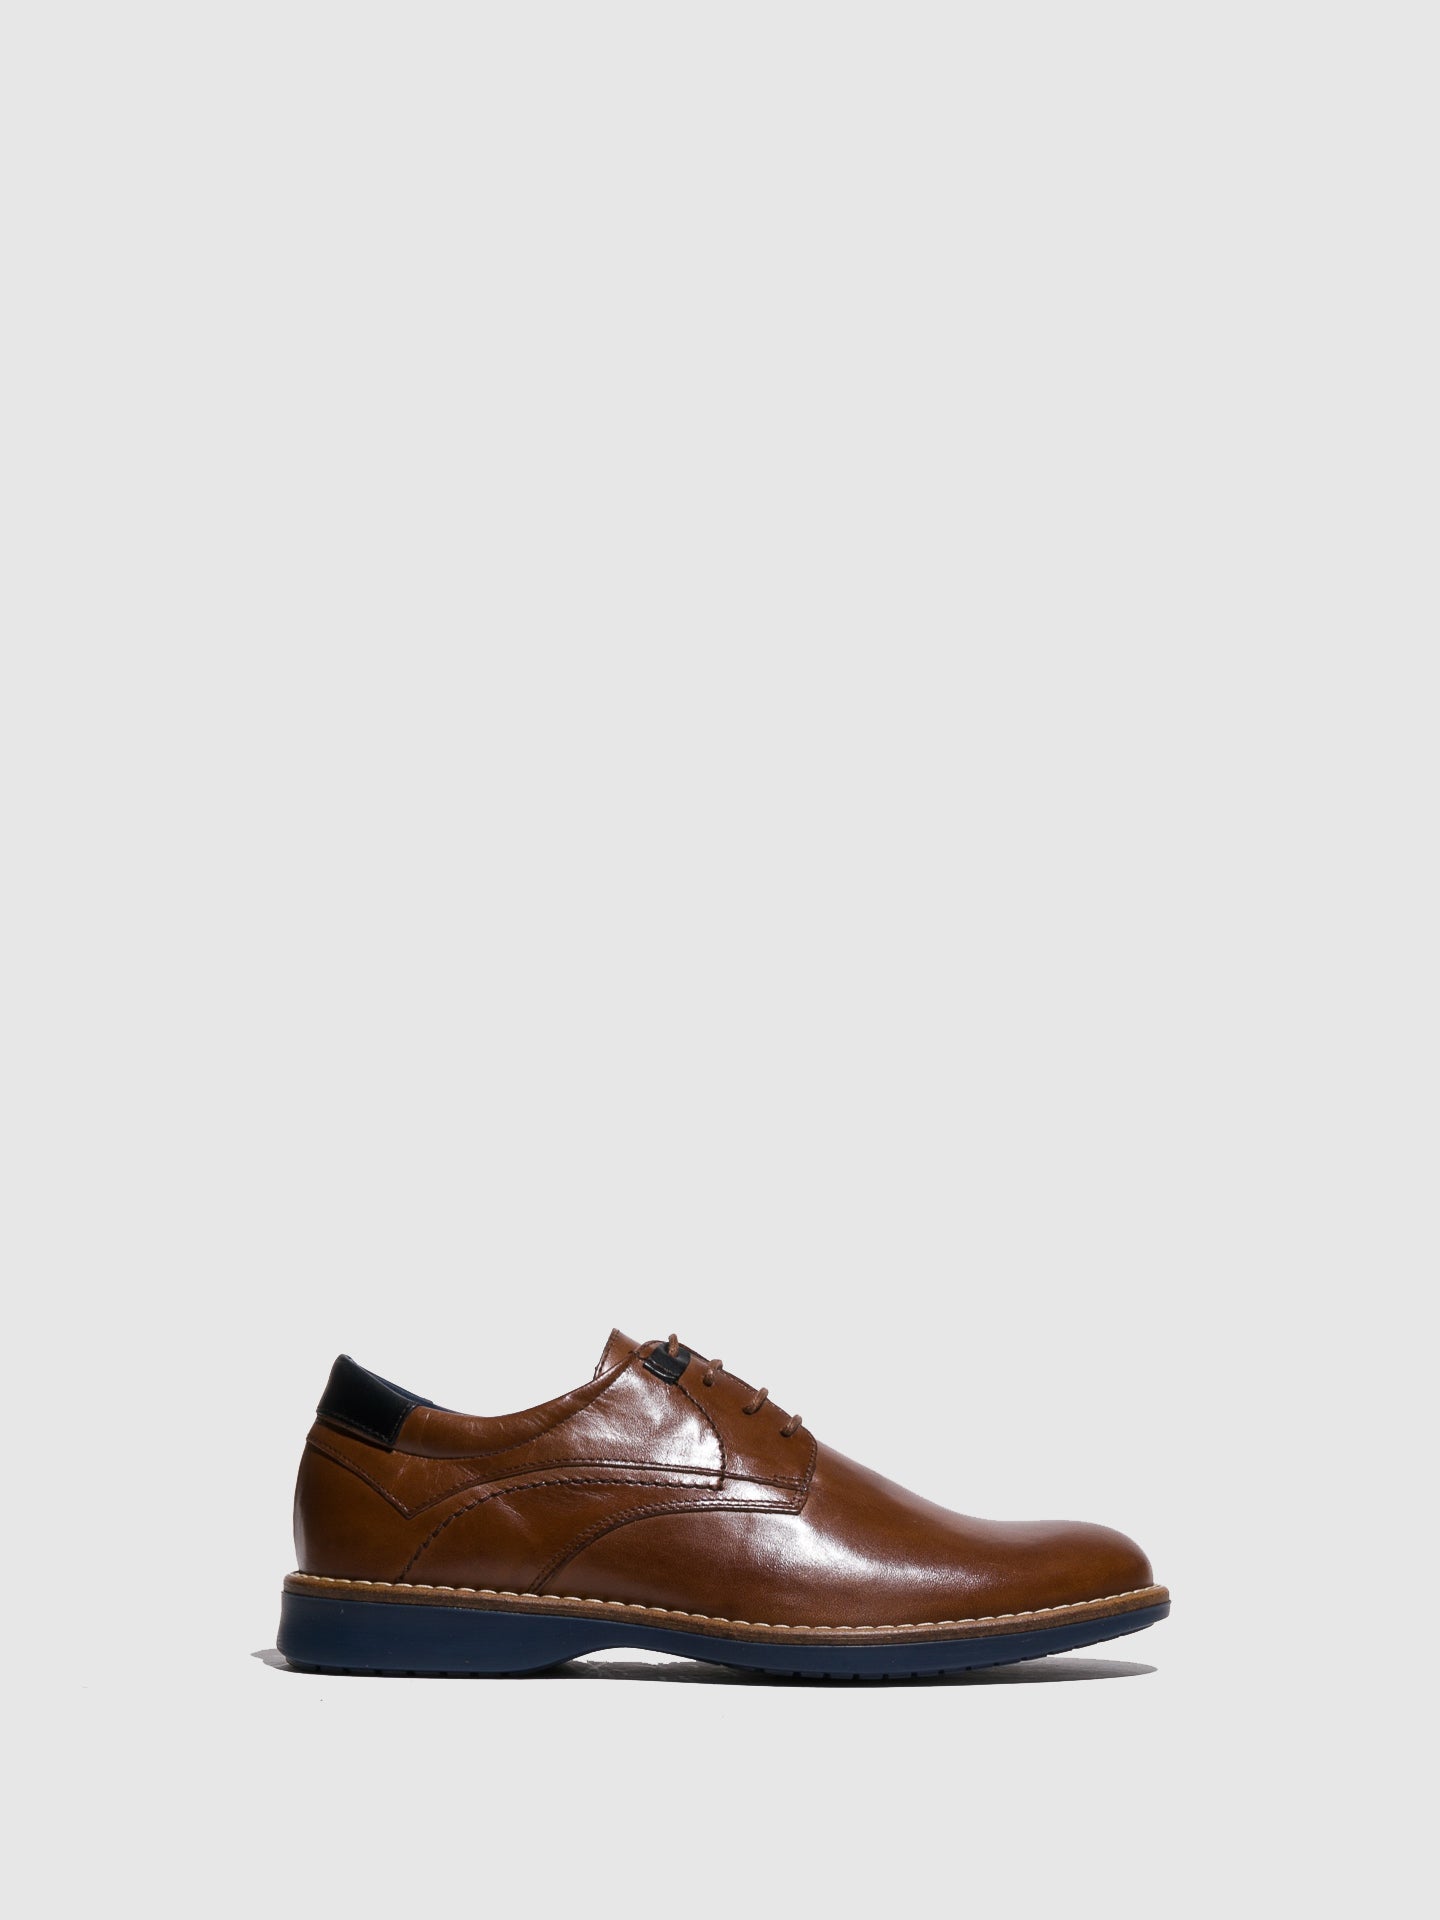 Foreva Brown Lace-up Shoes